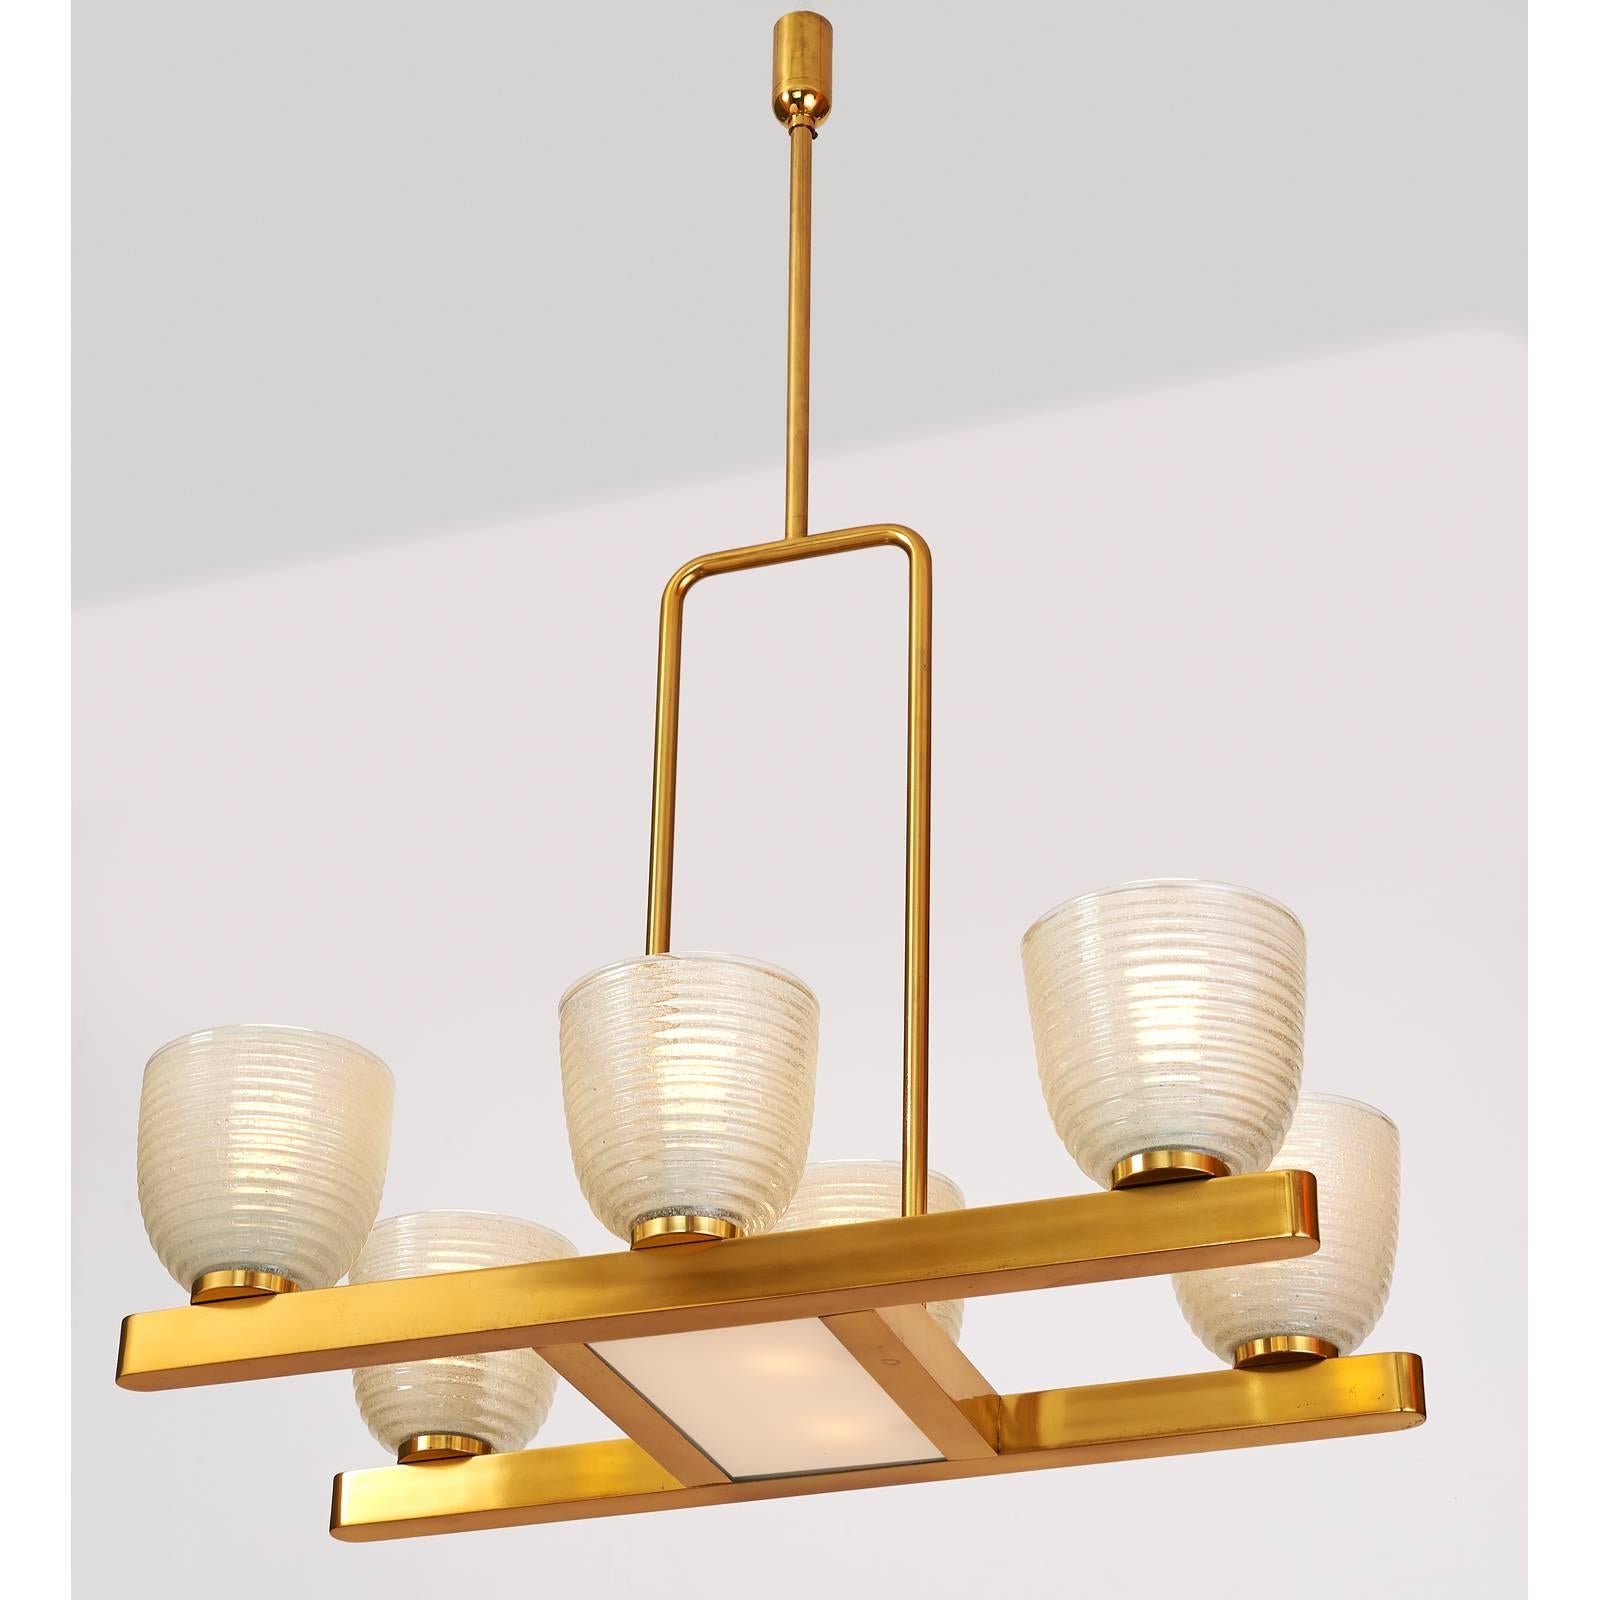 Brass Six Branch Murano Chandelier with Pulegoso Glass Shades, Italy, 1950s For Sale